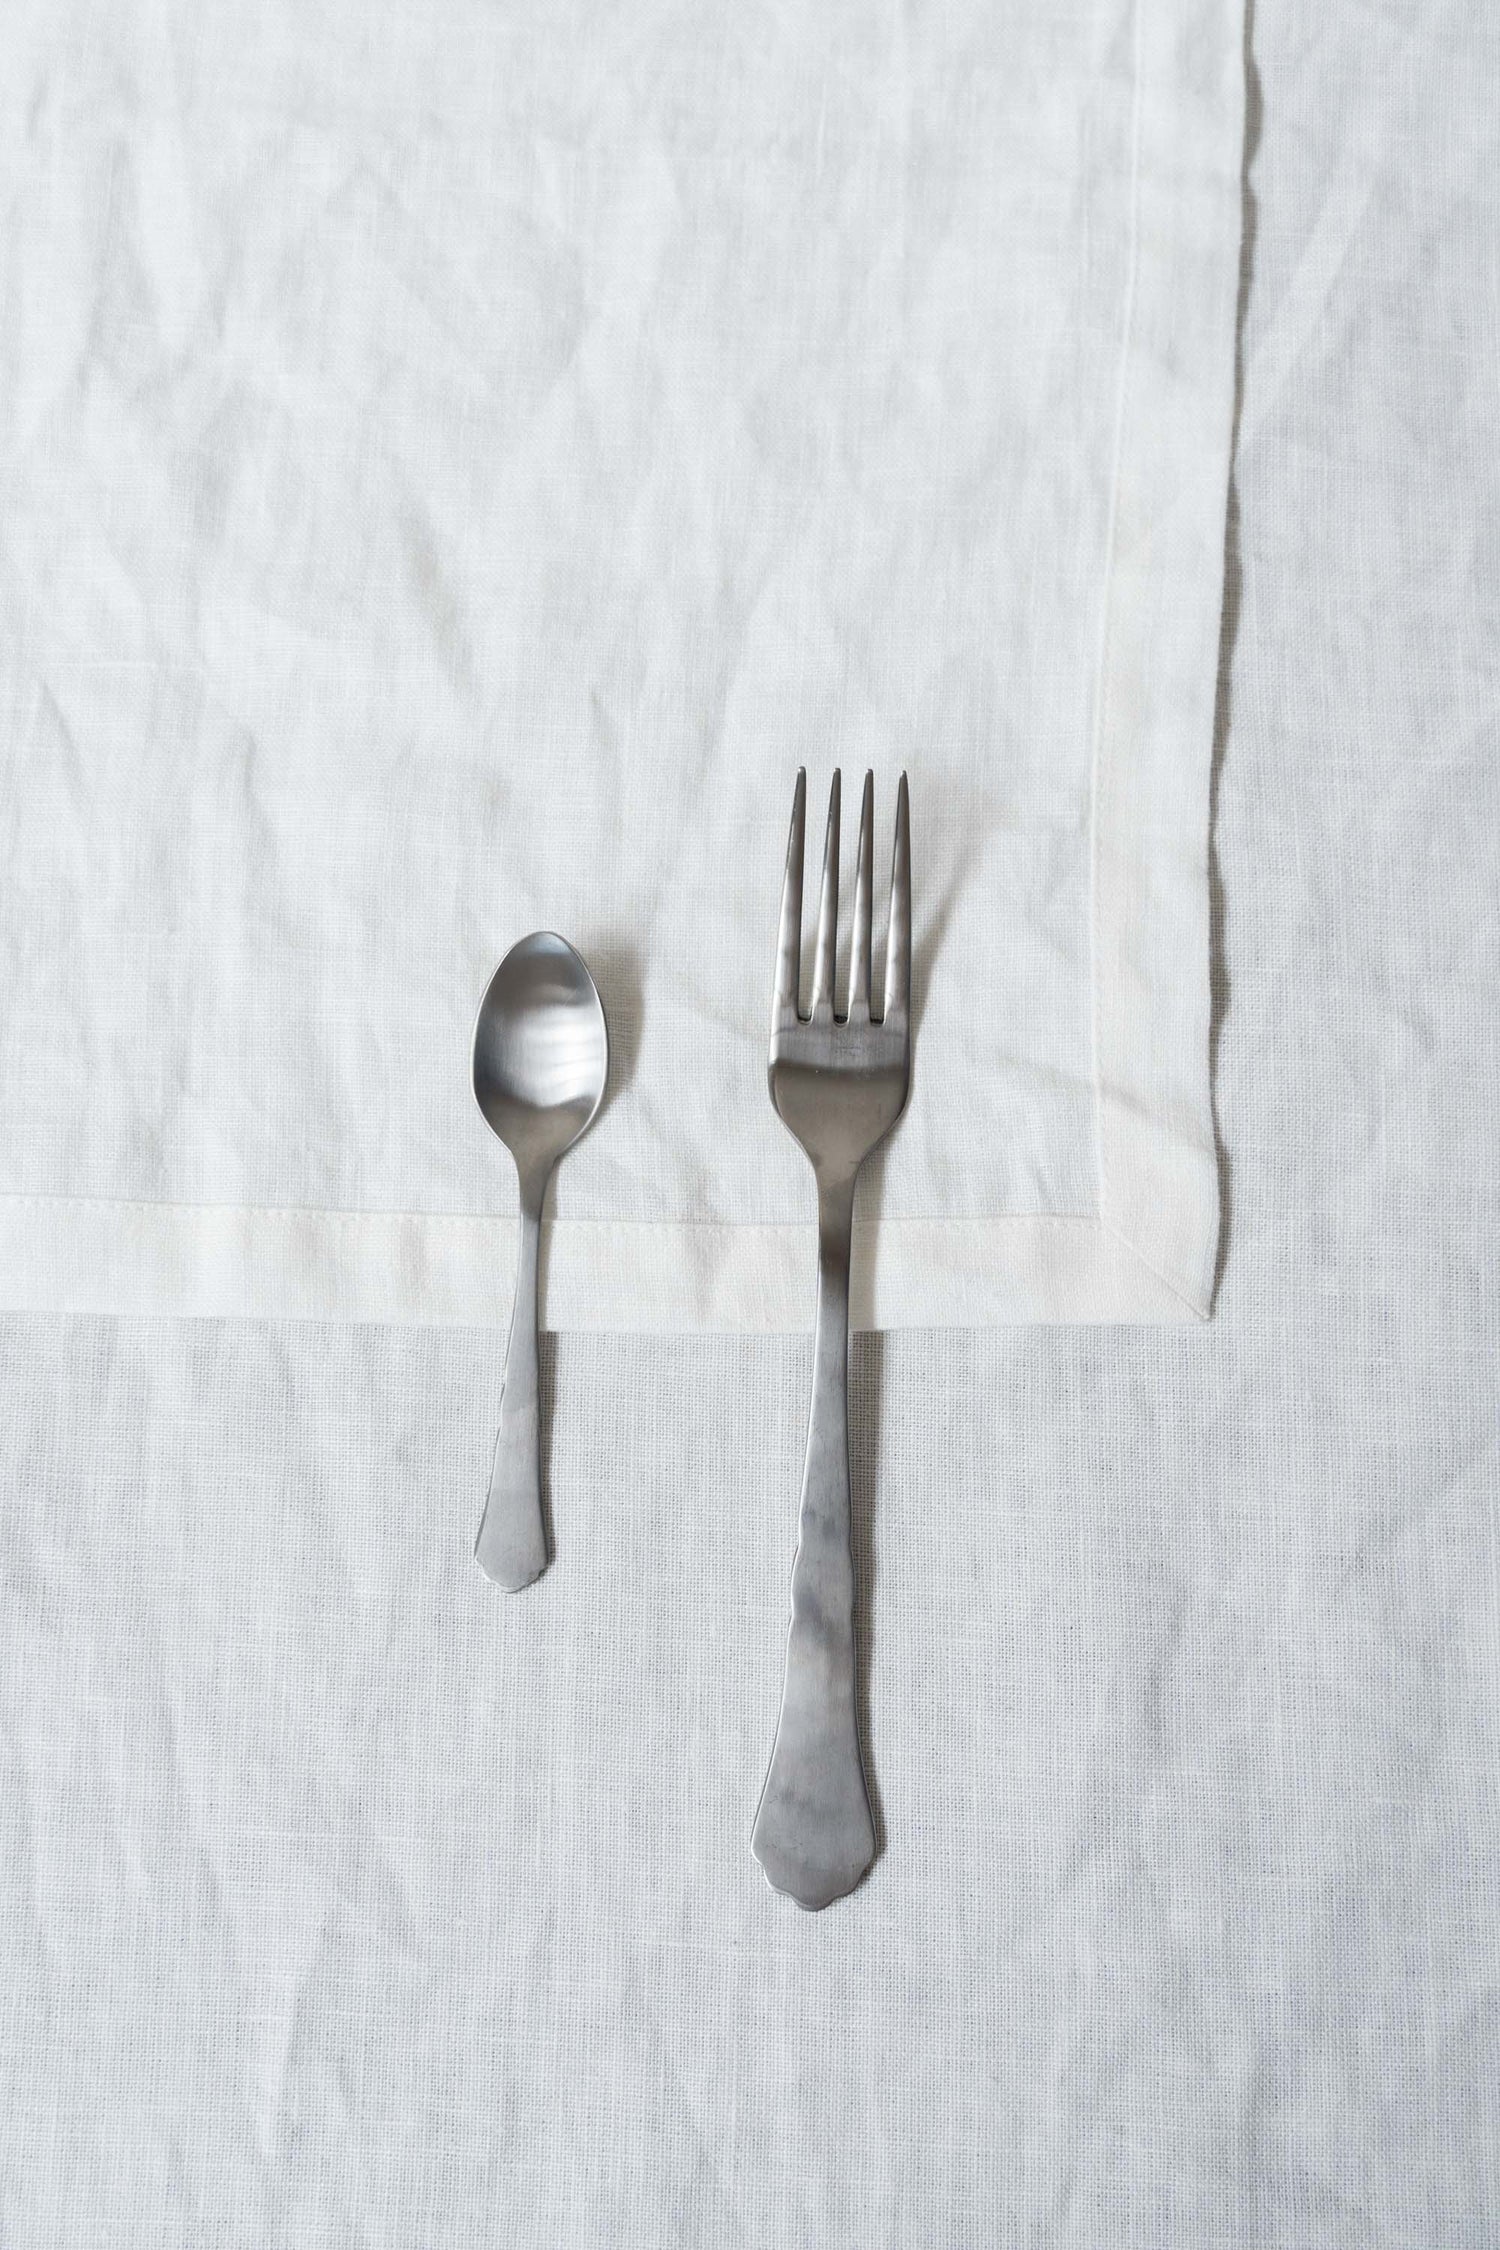 '700 Table Fork - part of the '700 edition KnIndustrie Cutlery collection. Perfect for mains.